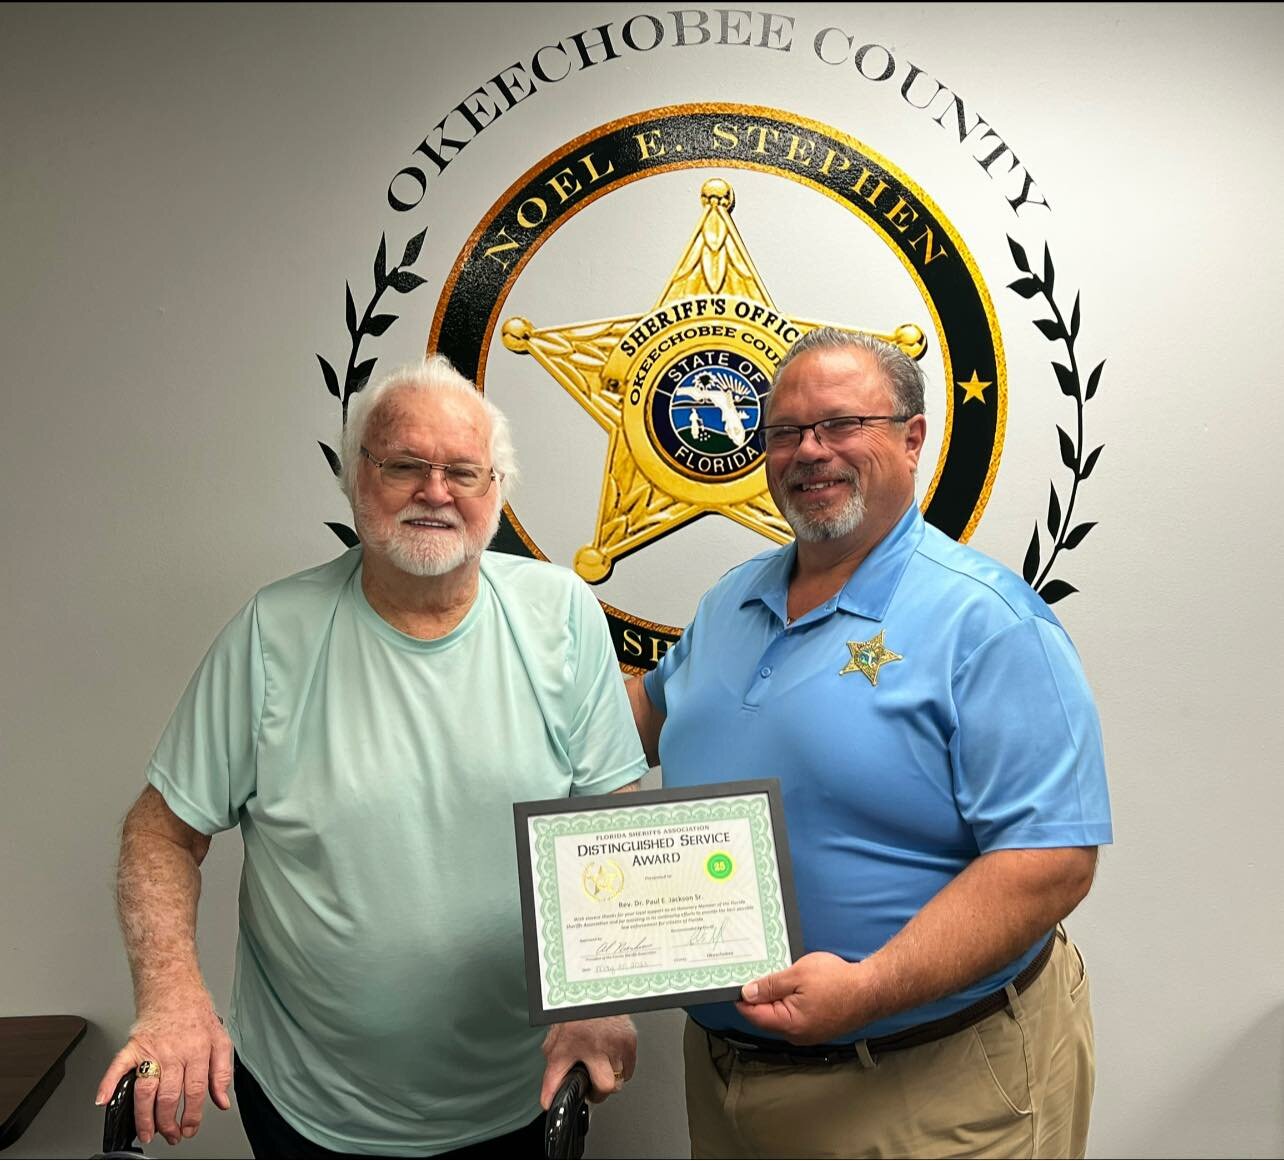 Rev. Dr. Paul Jackson Sr. was presented the Distinguished Service Award by Sheriff Noel E. Stephen on behalf of the Florida Sheriff's Association for 25 years of continued support.